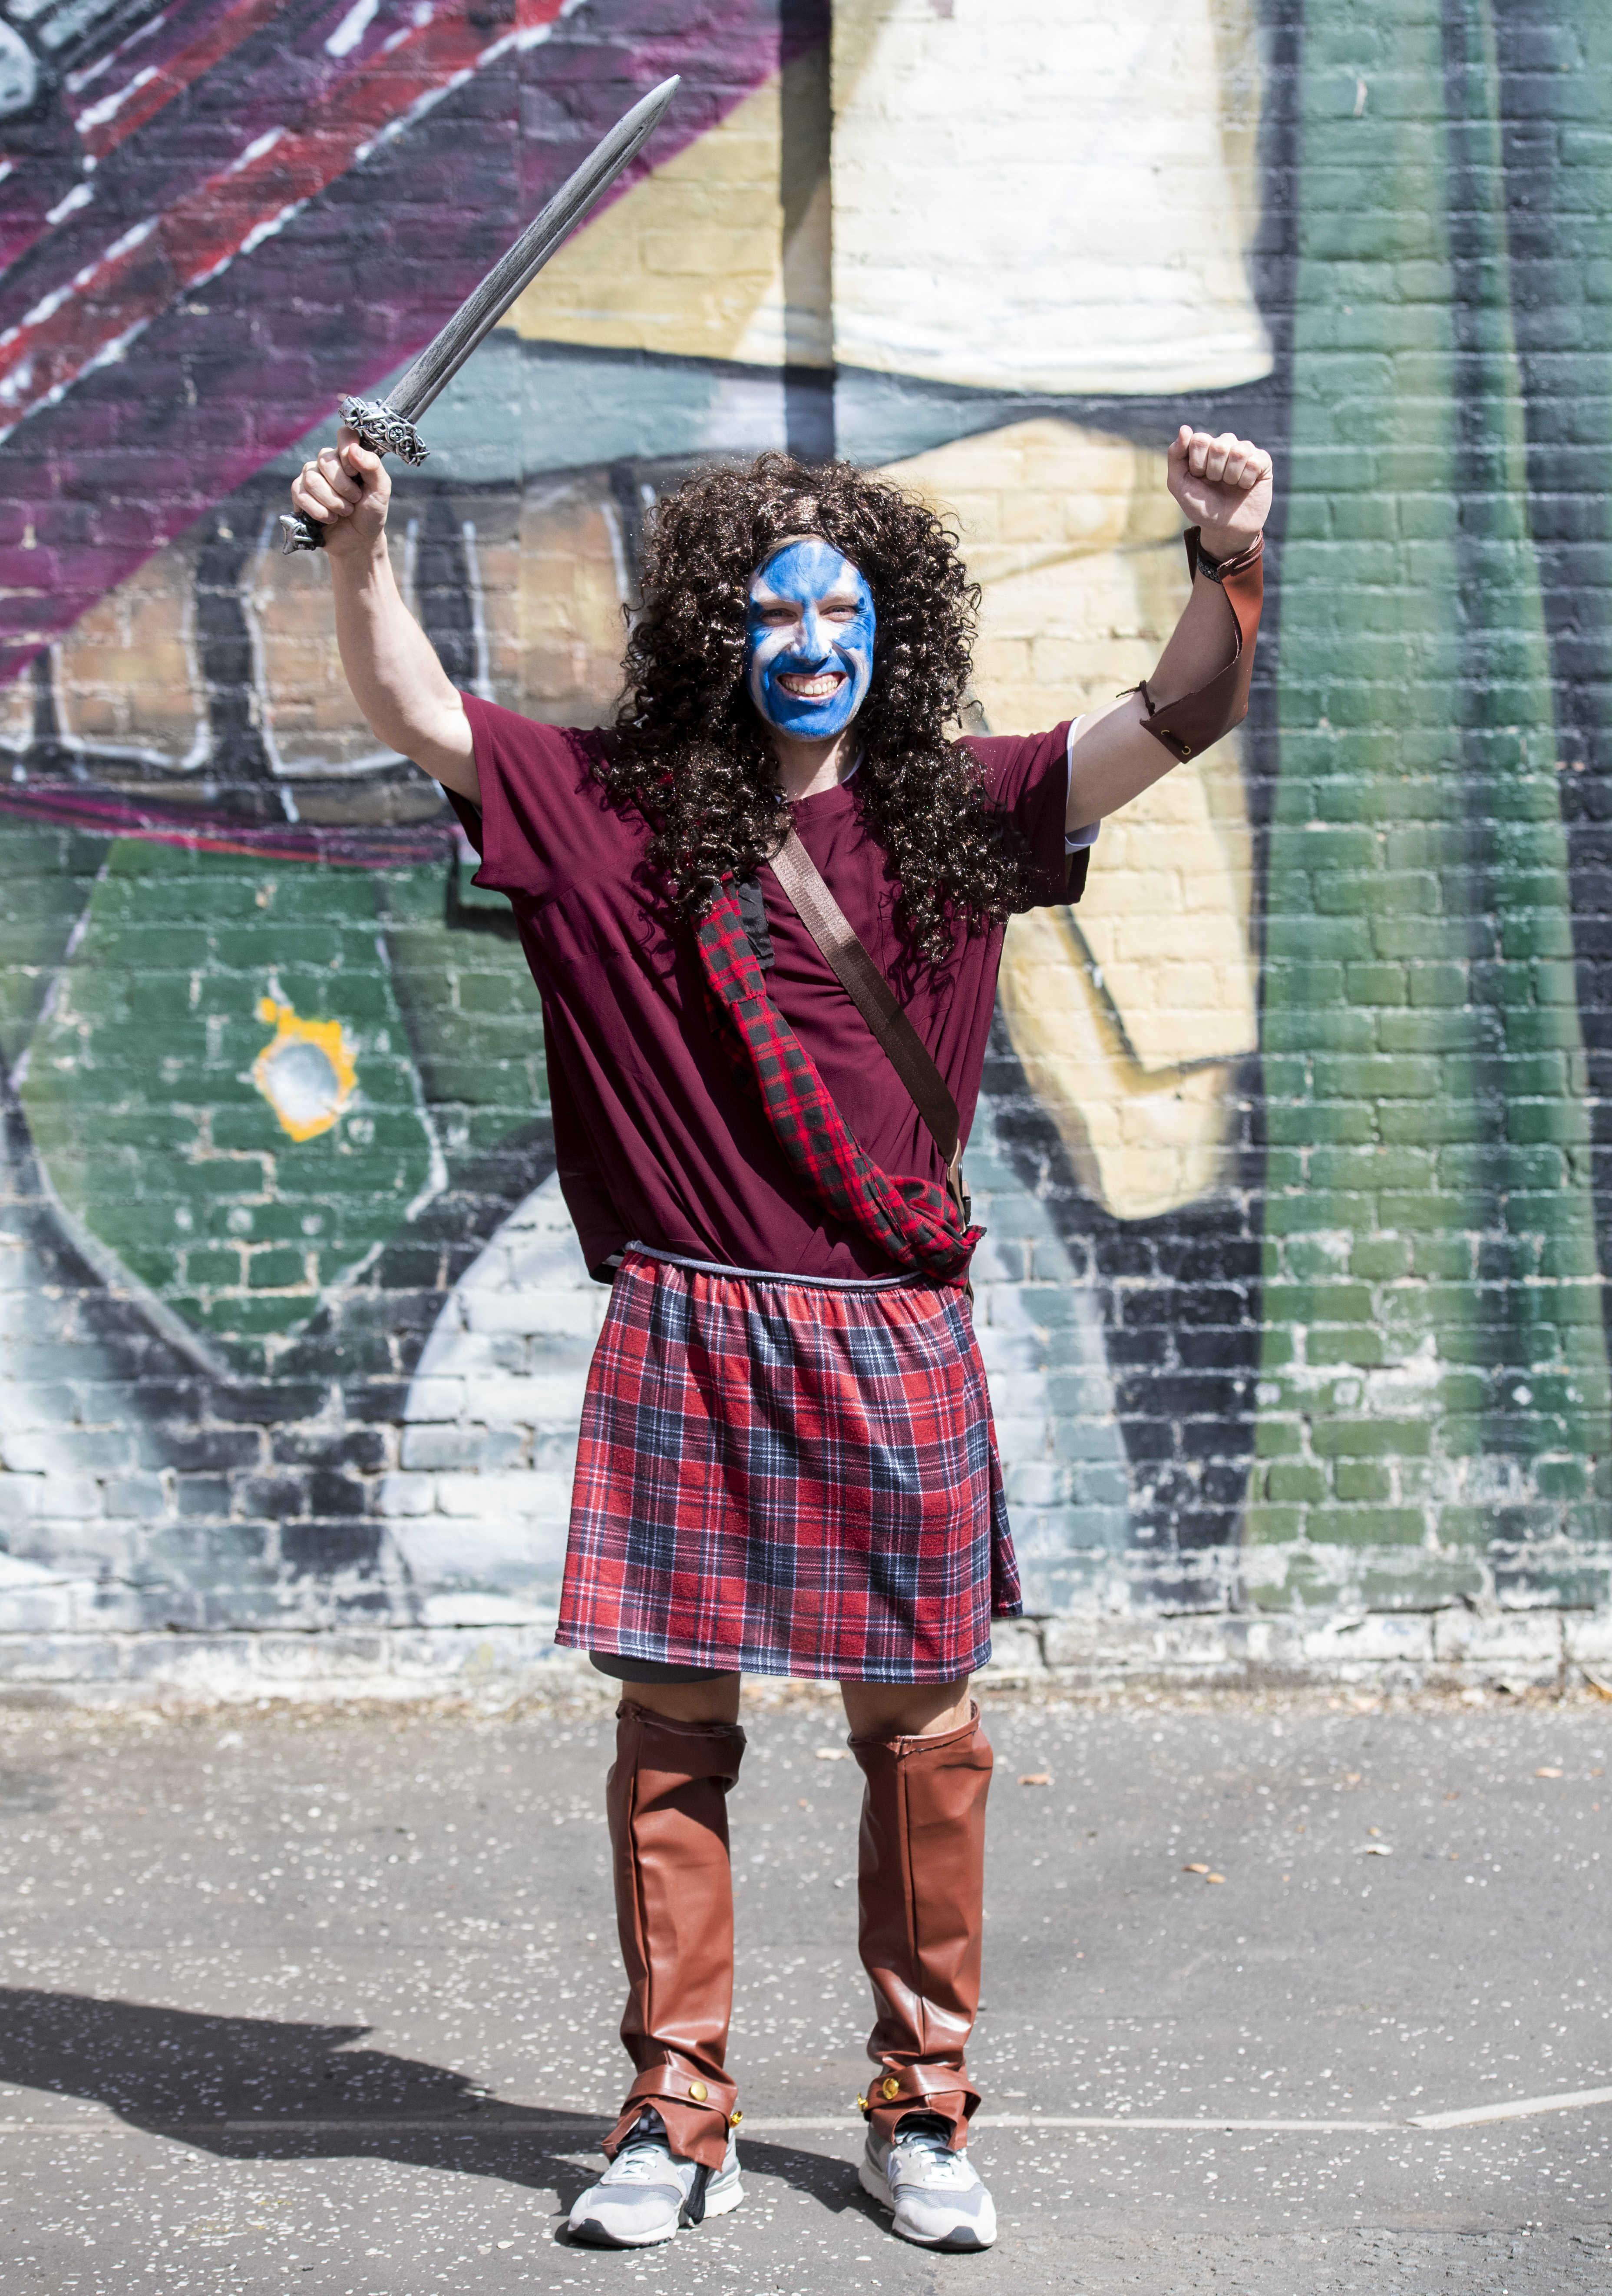 Braveheart: Many fans dressed for the occasion. 